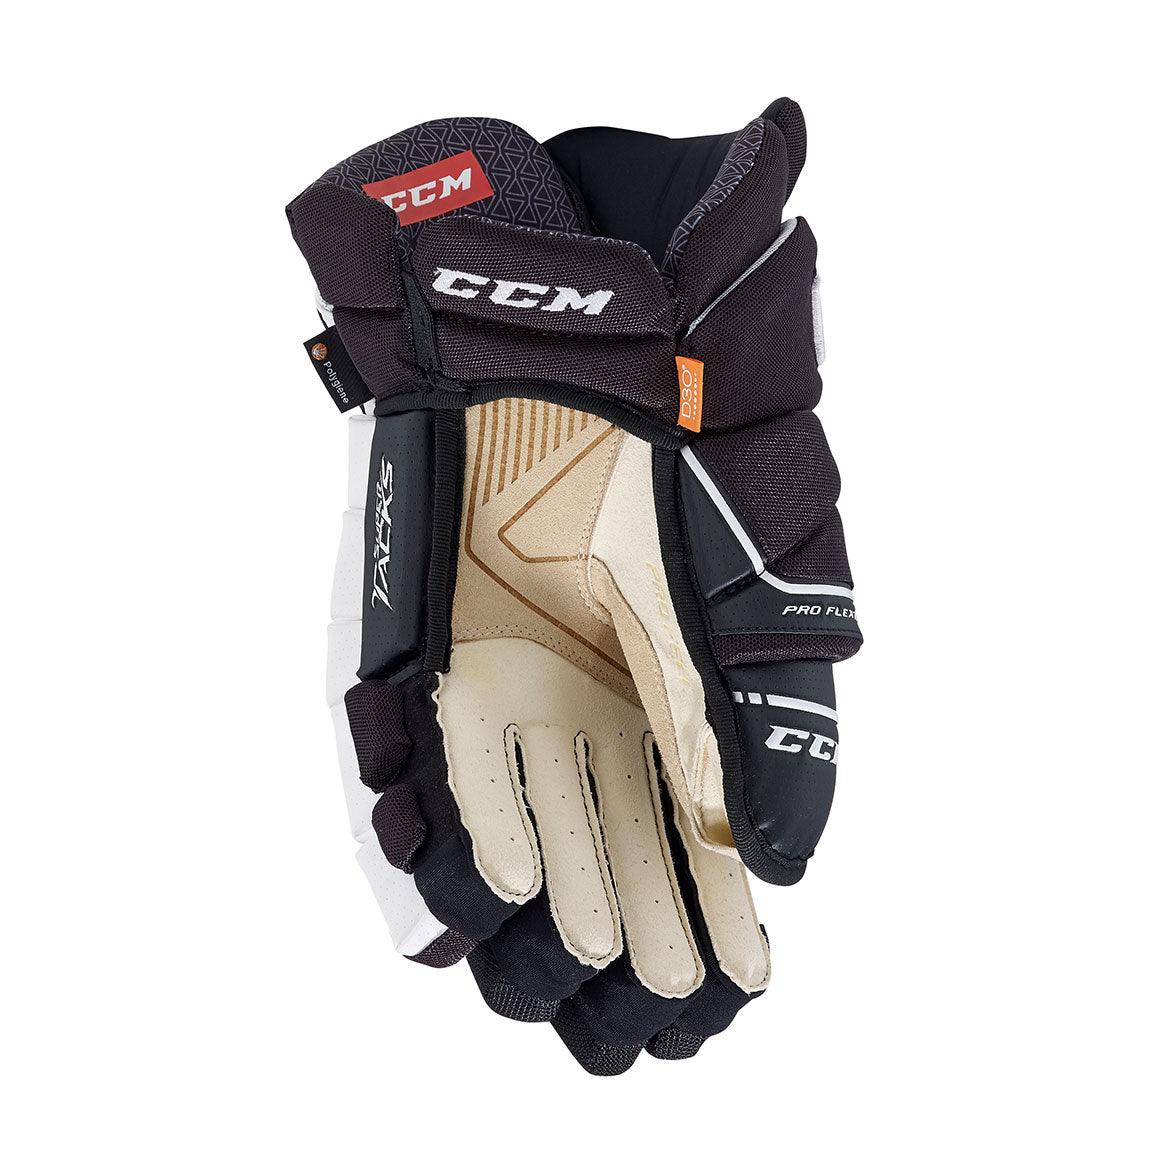 Super Tacks AS1 Hockey Gloves - Youth - Sports Excellence